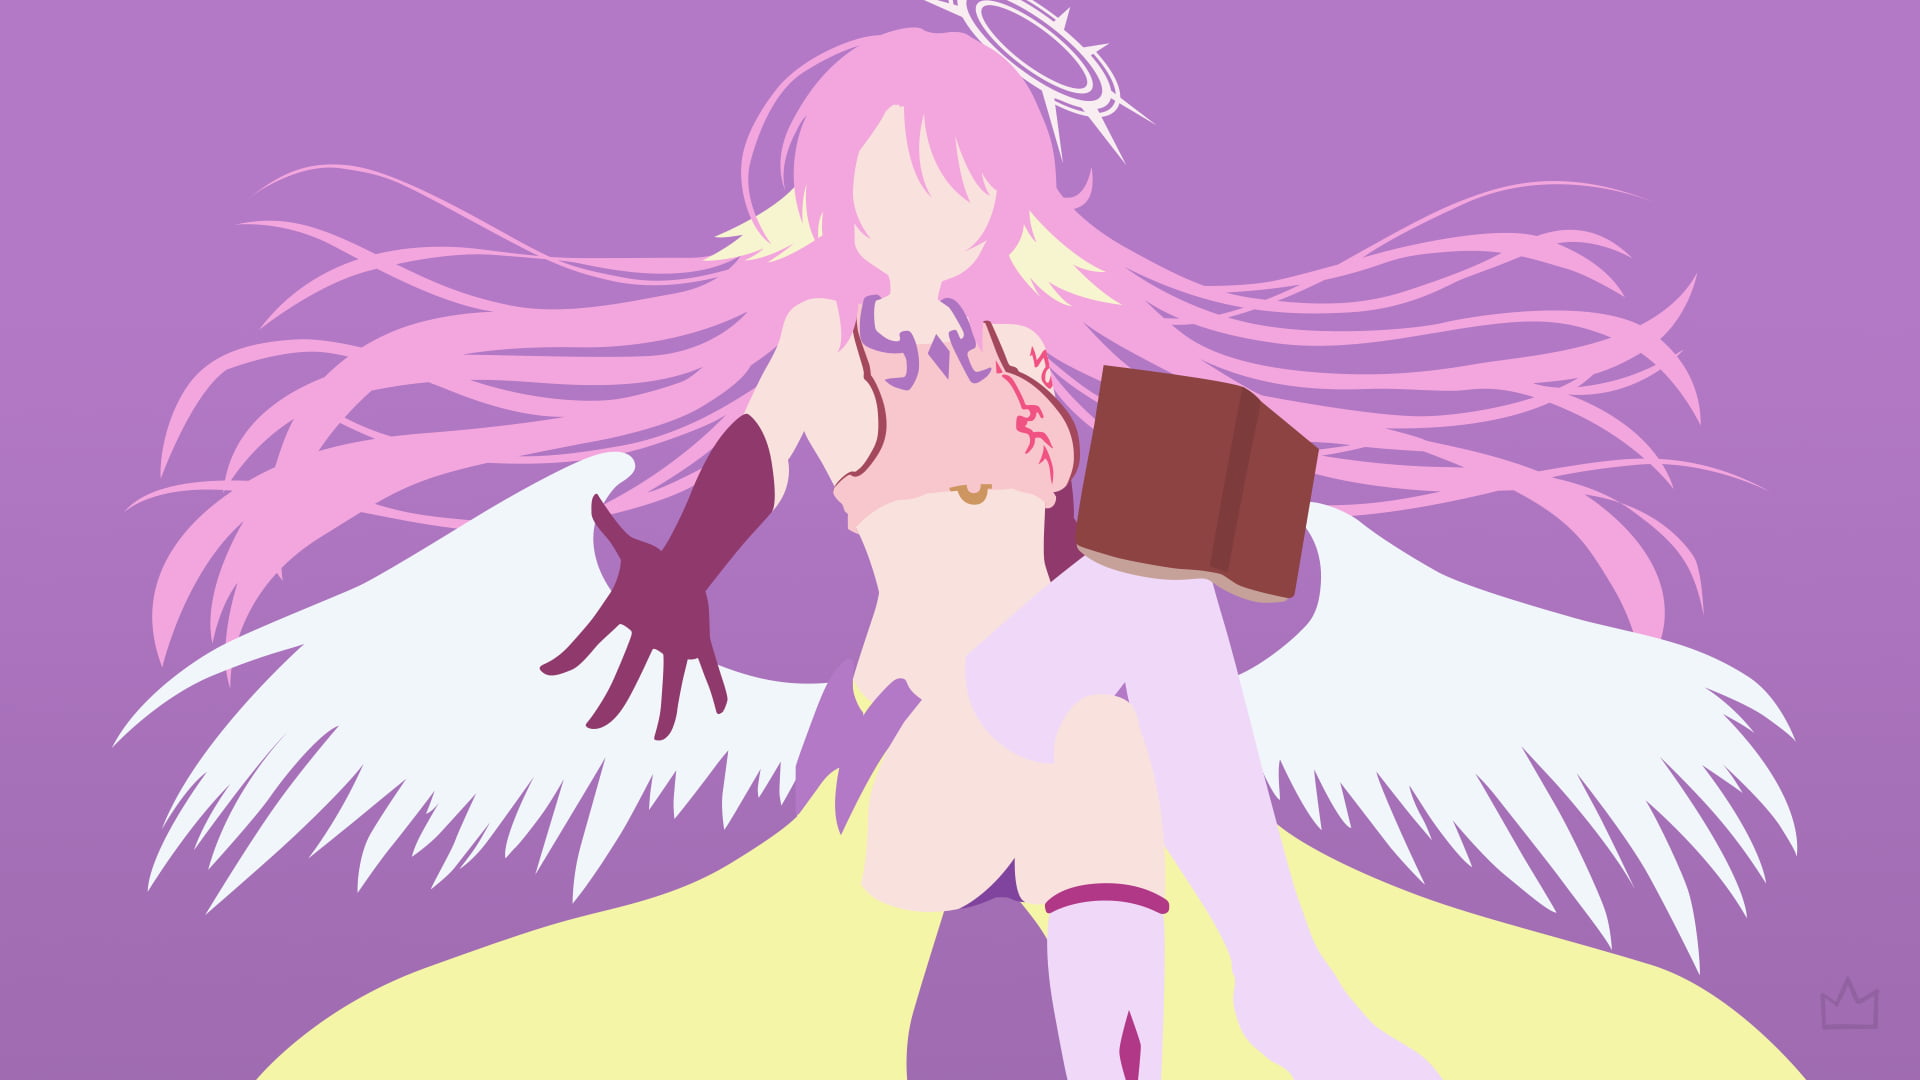 pink haired female character with wing wallpaper